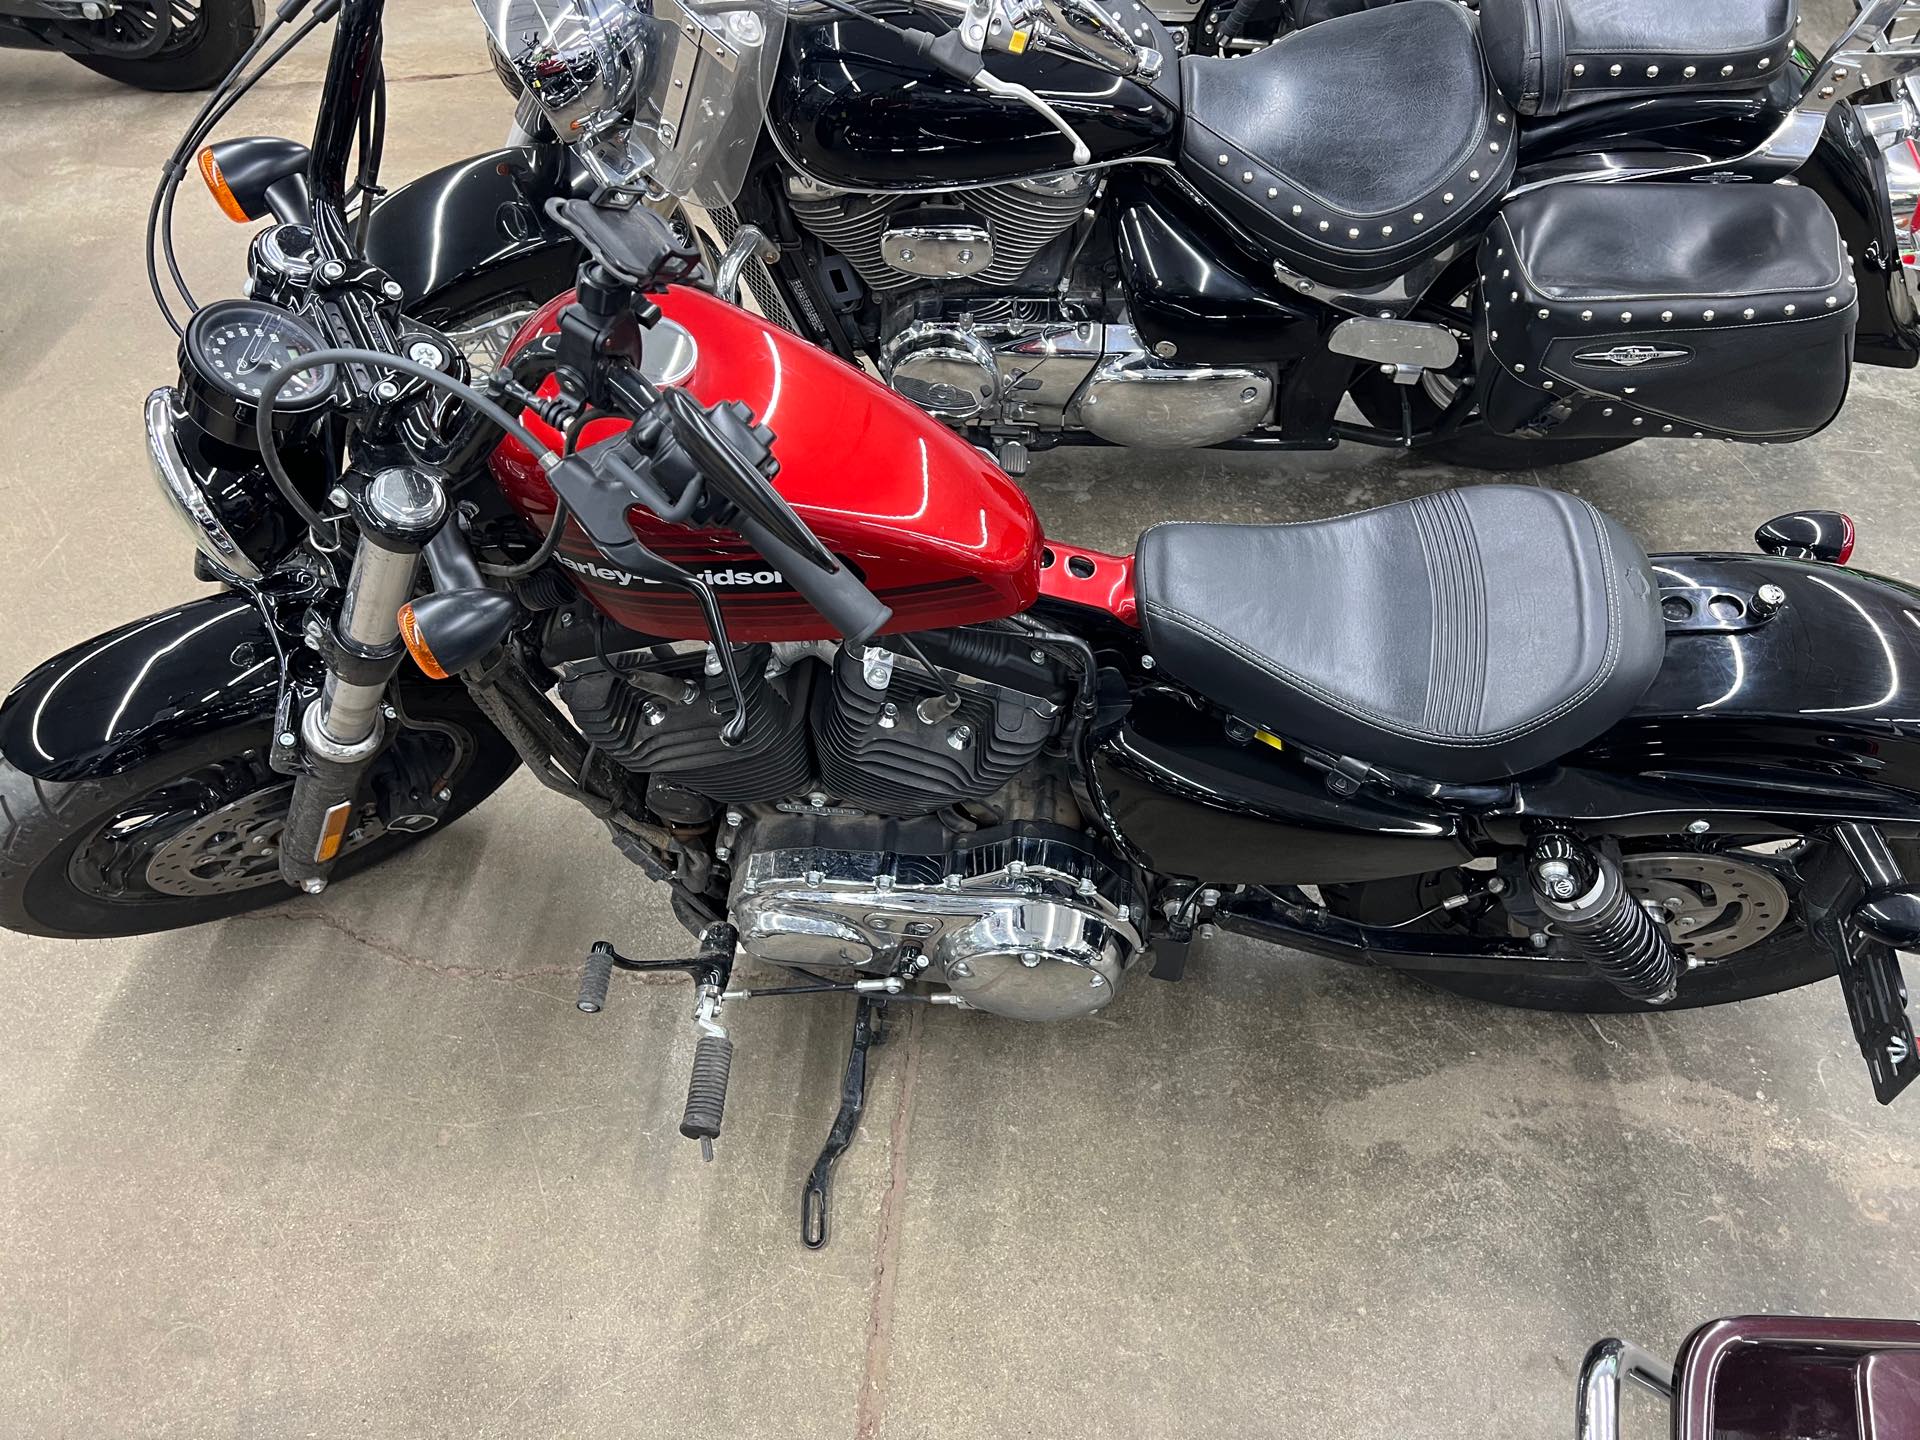 2018 Harley-Davidson Sportster Forty-Eight Special at Interlakes Sport Center